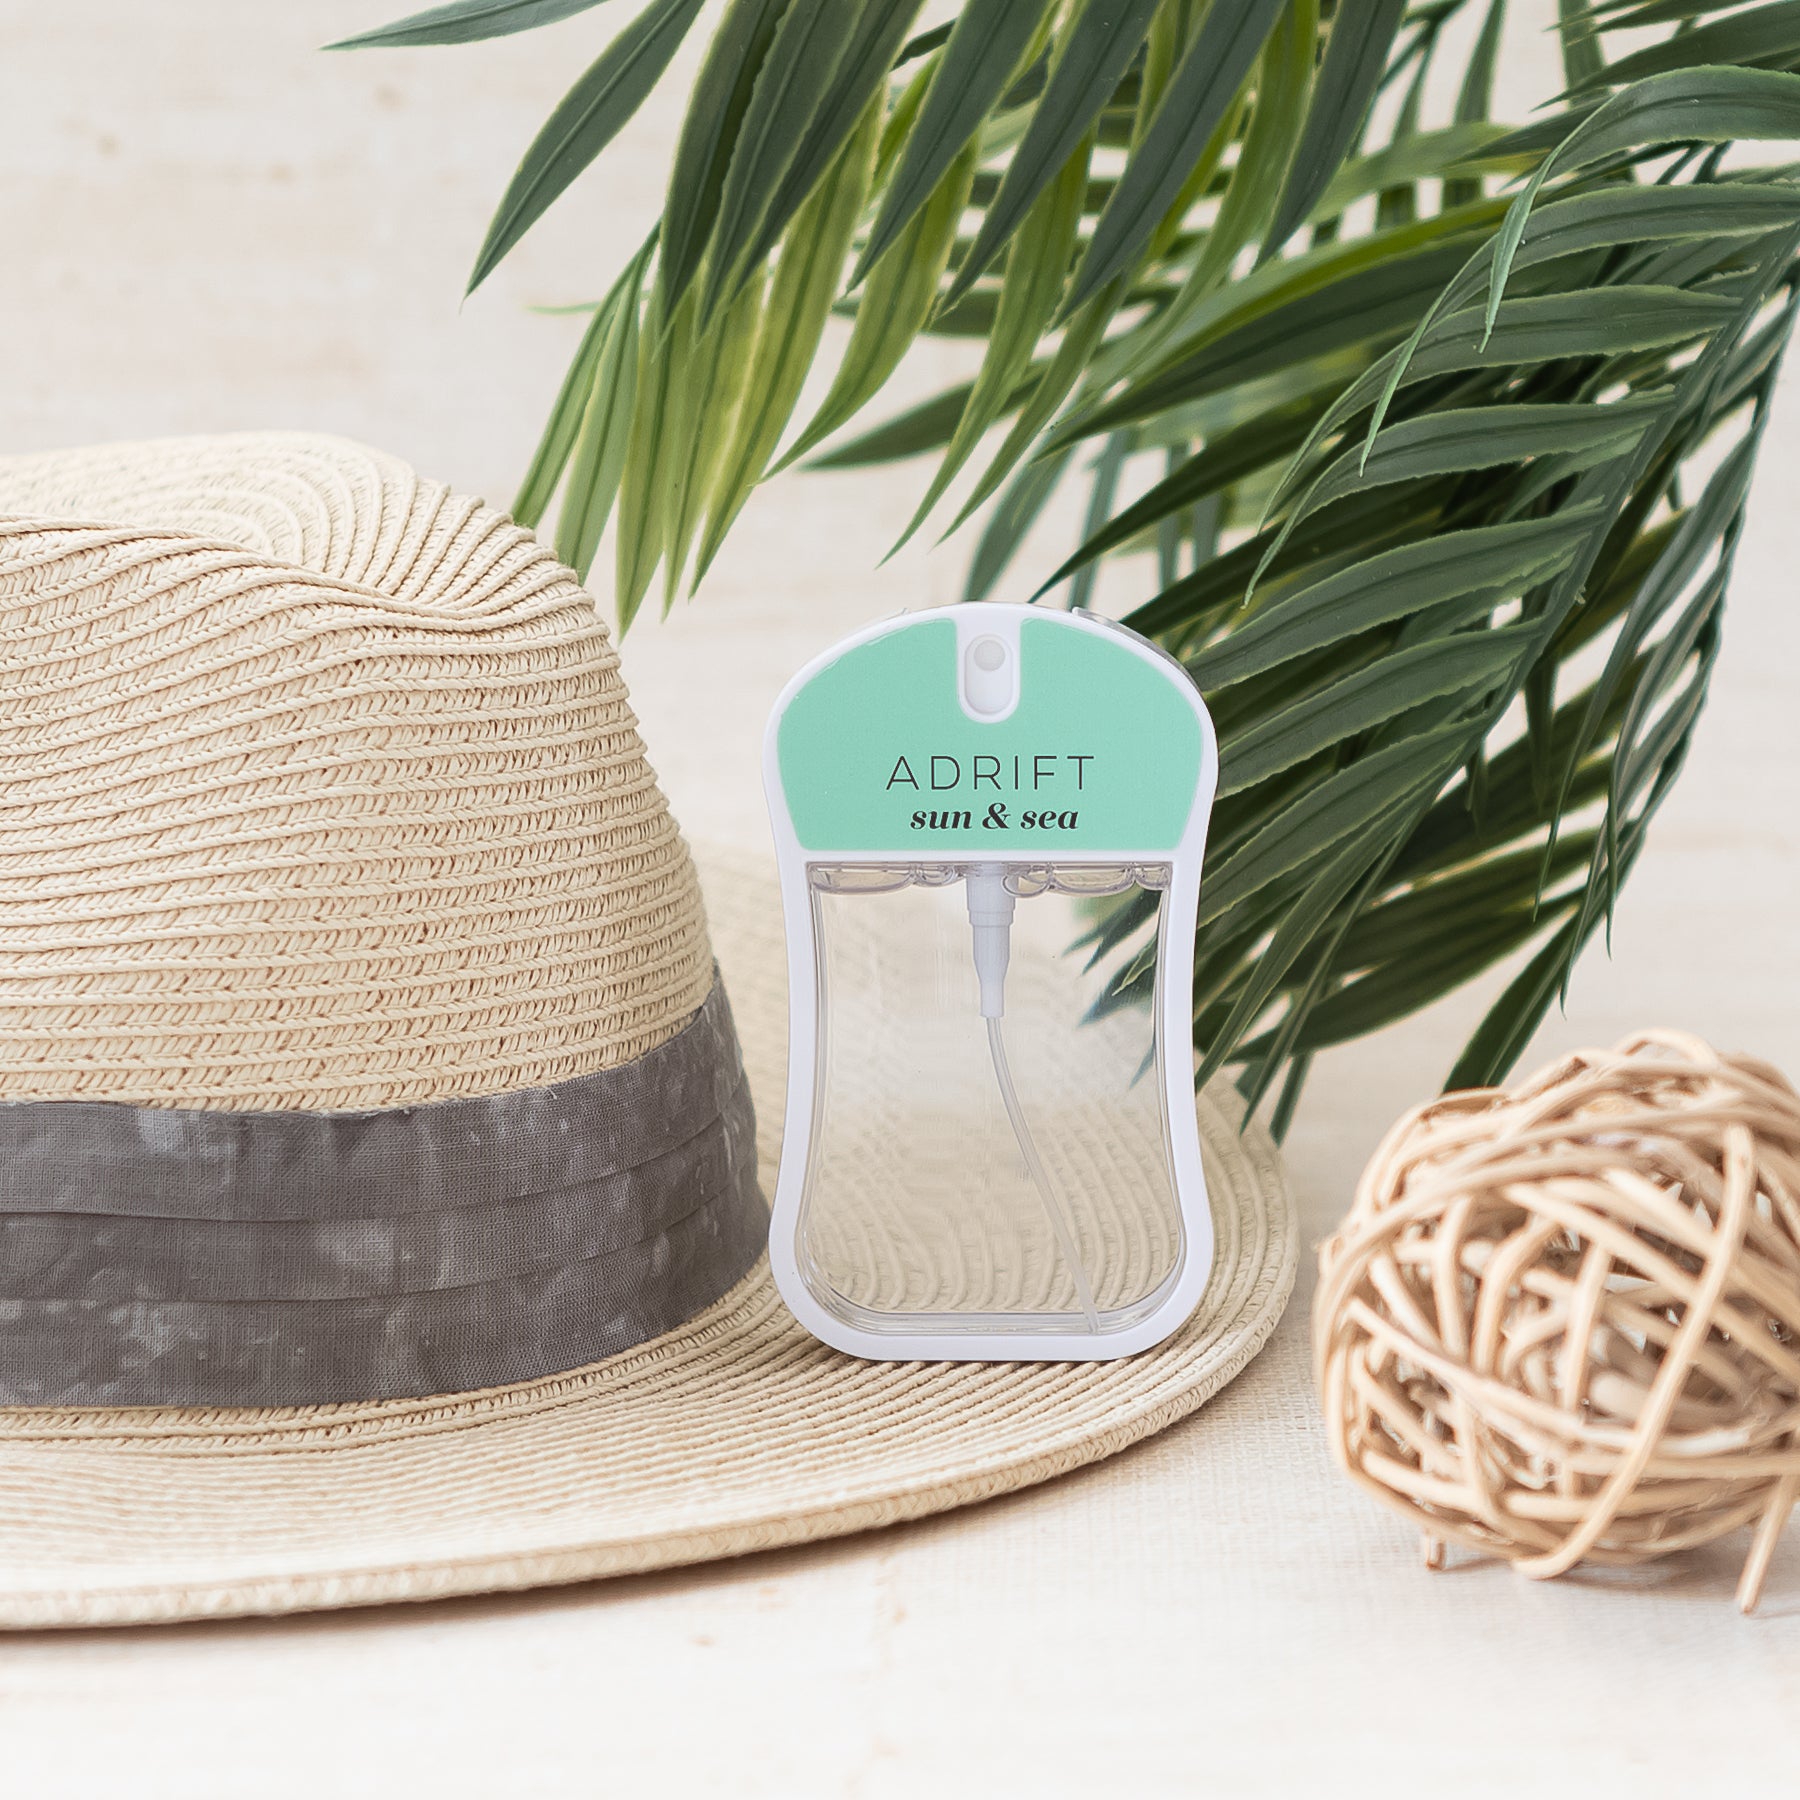 Adrift (Sun & Sea) moisturizing body mist spray bottle with light green color and clear liquid in a rounded rectangle shape. Spray bottle has 1.1 fl ox or 35 mL. spray bottle is on straw hat with palm tree in background.